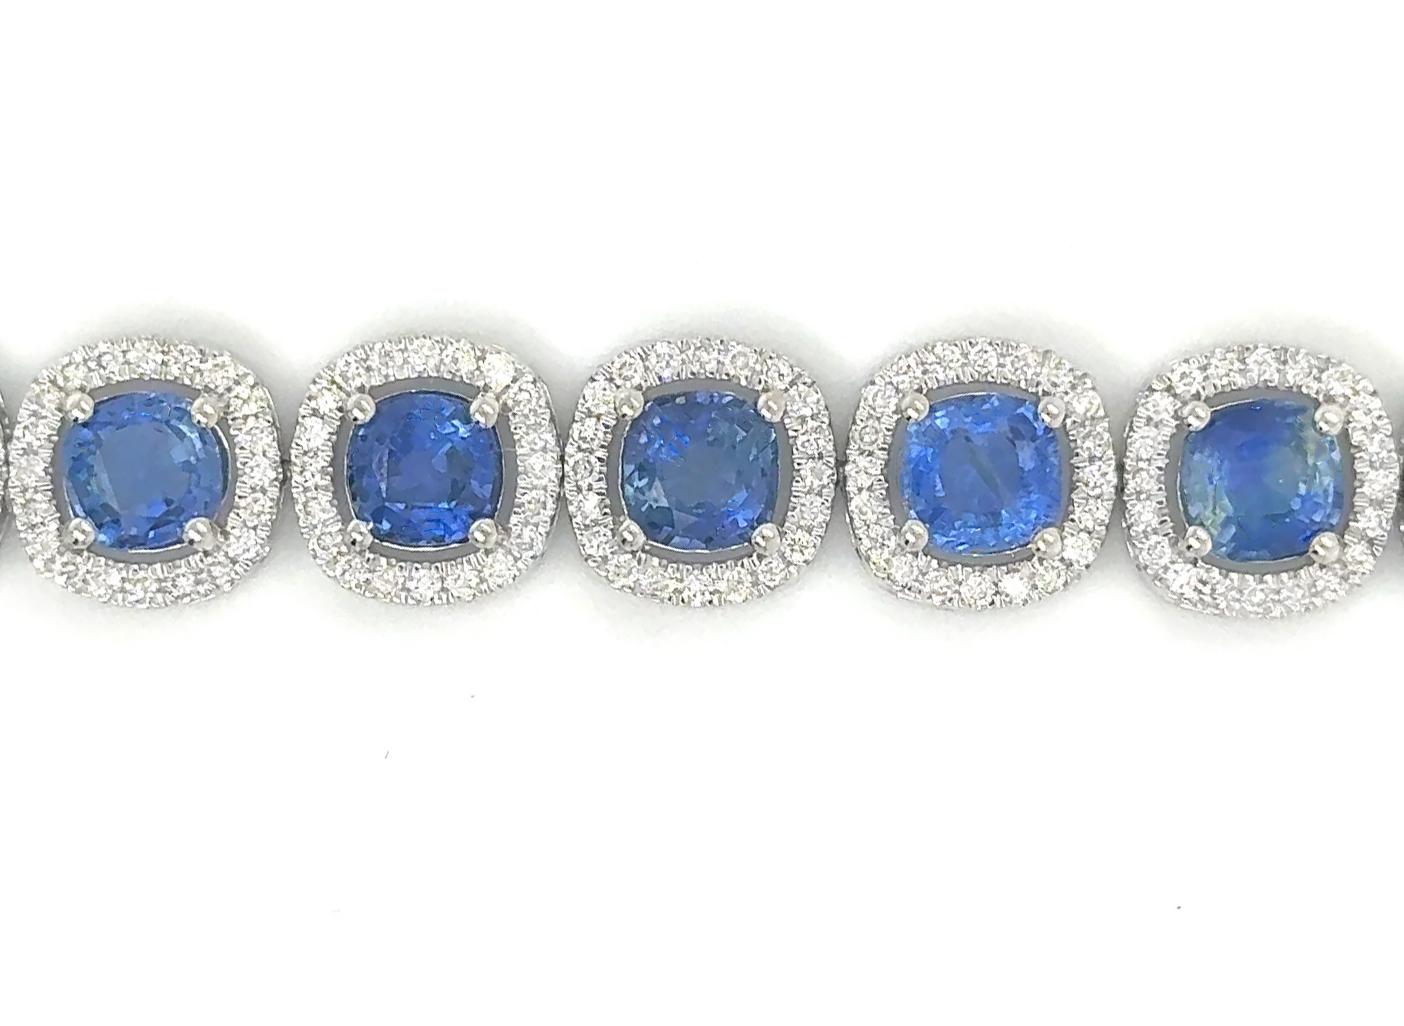 Contemporary Sapphire Bracelet With Diamonds 17.36 Carats 14K White Gold For Sale